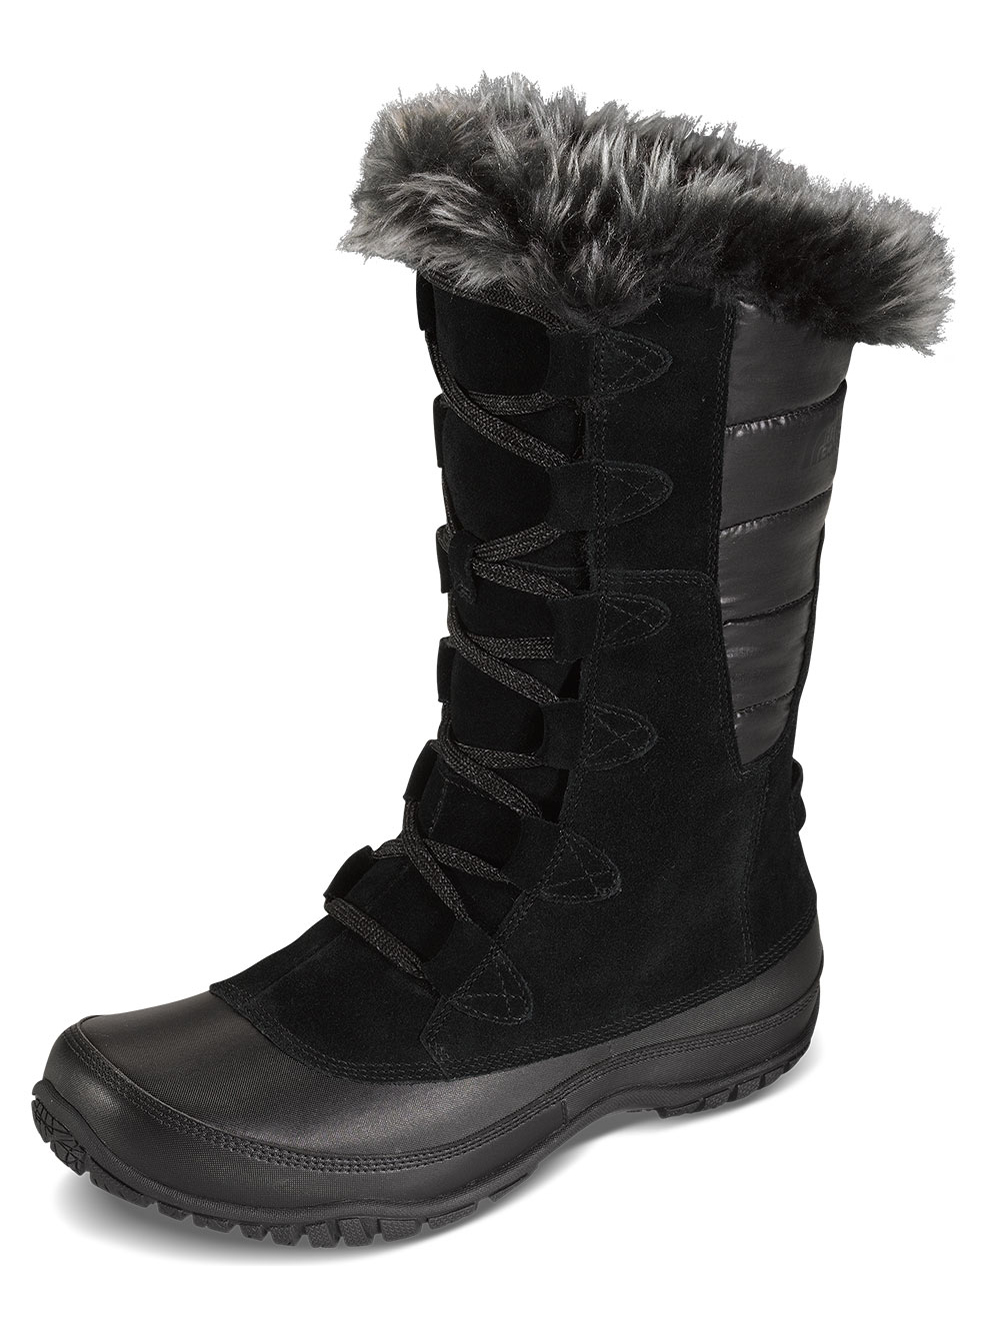 The North Face Women's Nupste Purna Boots